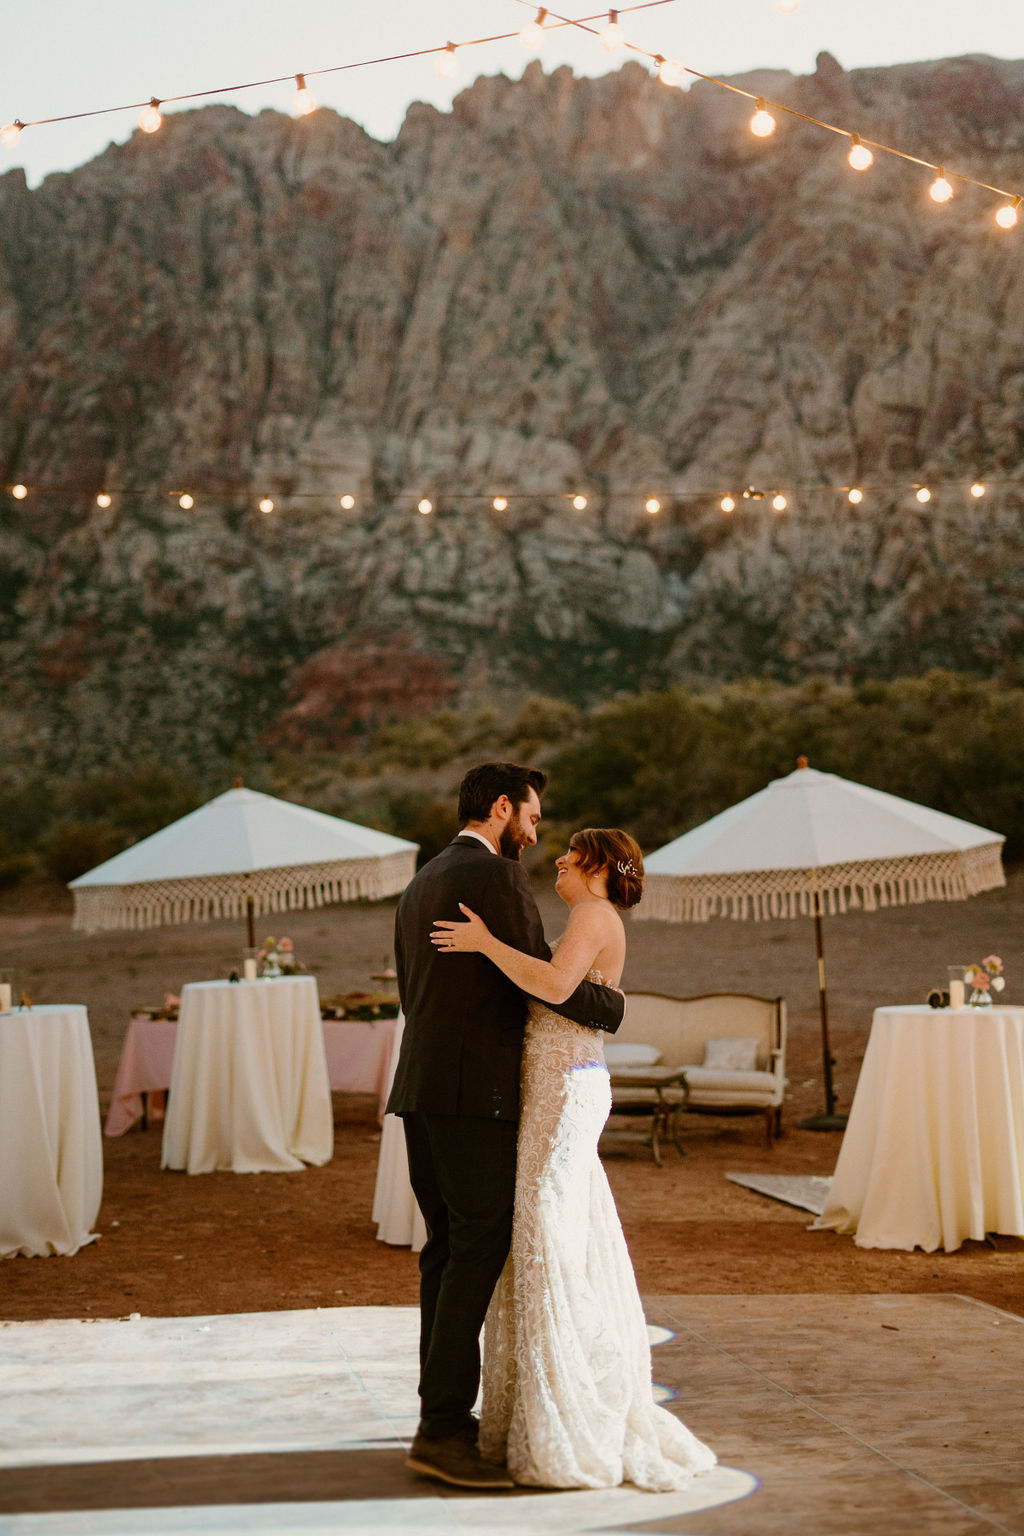 A couple in formal attire sharing a dance outdoors at sunset, with string lights and mountains in the background.